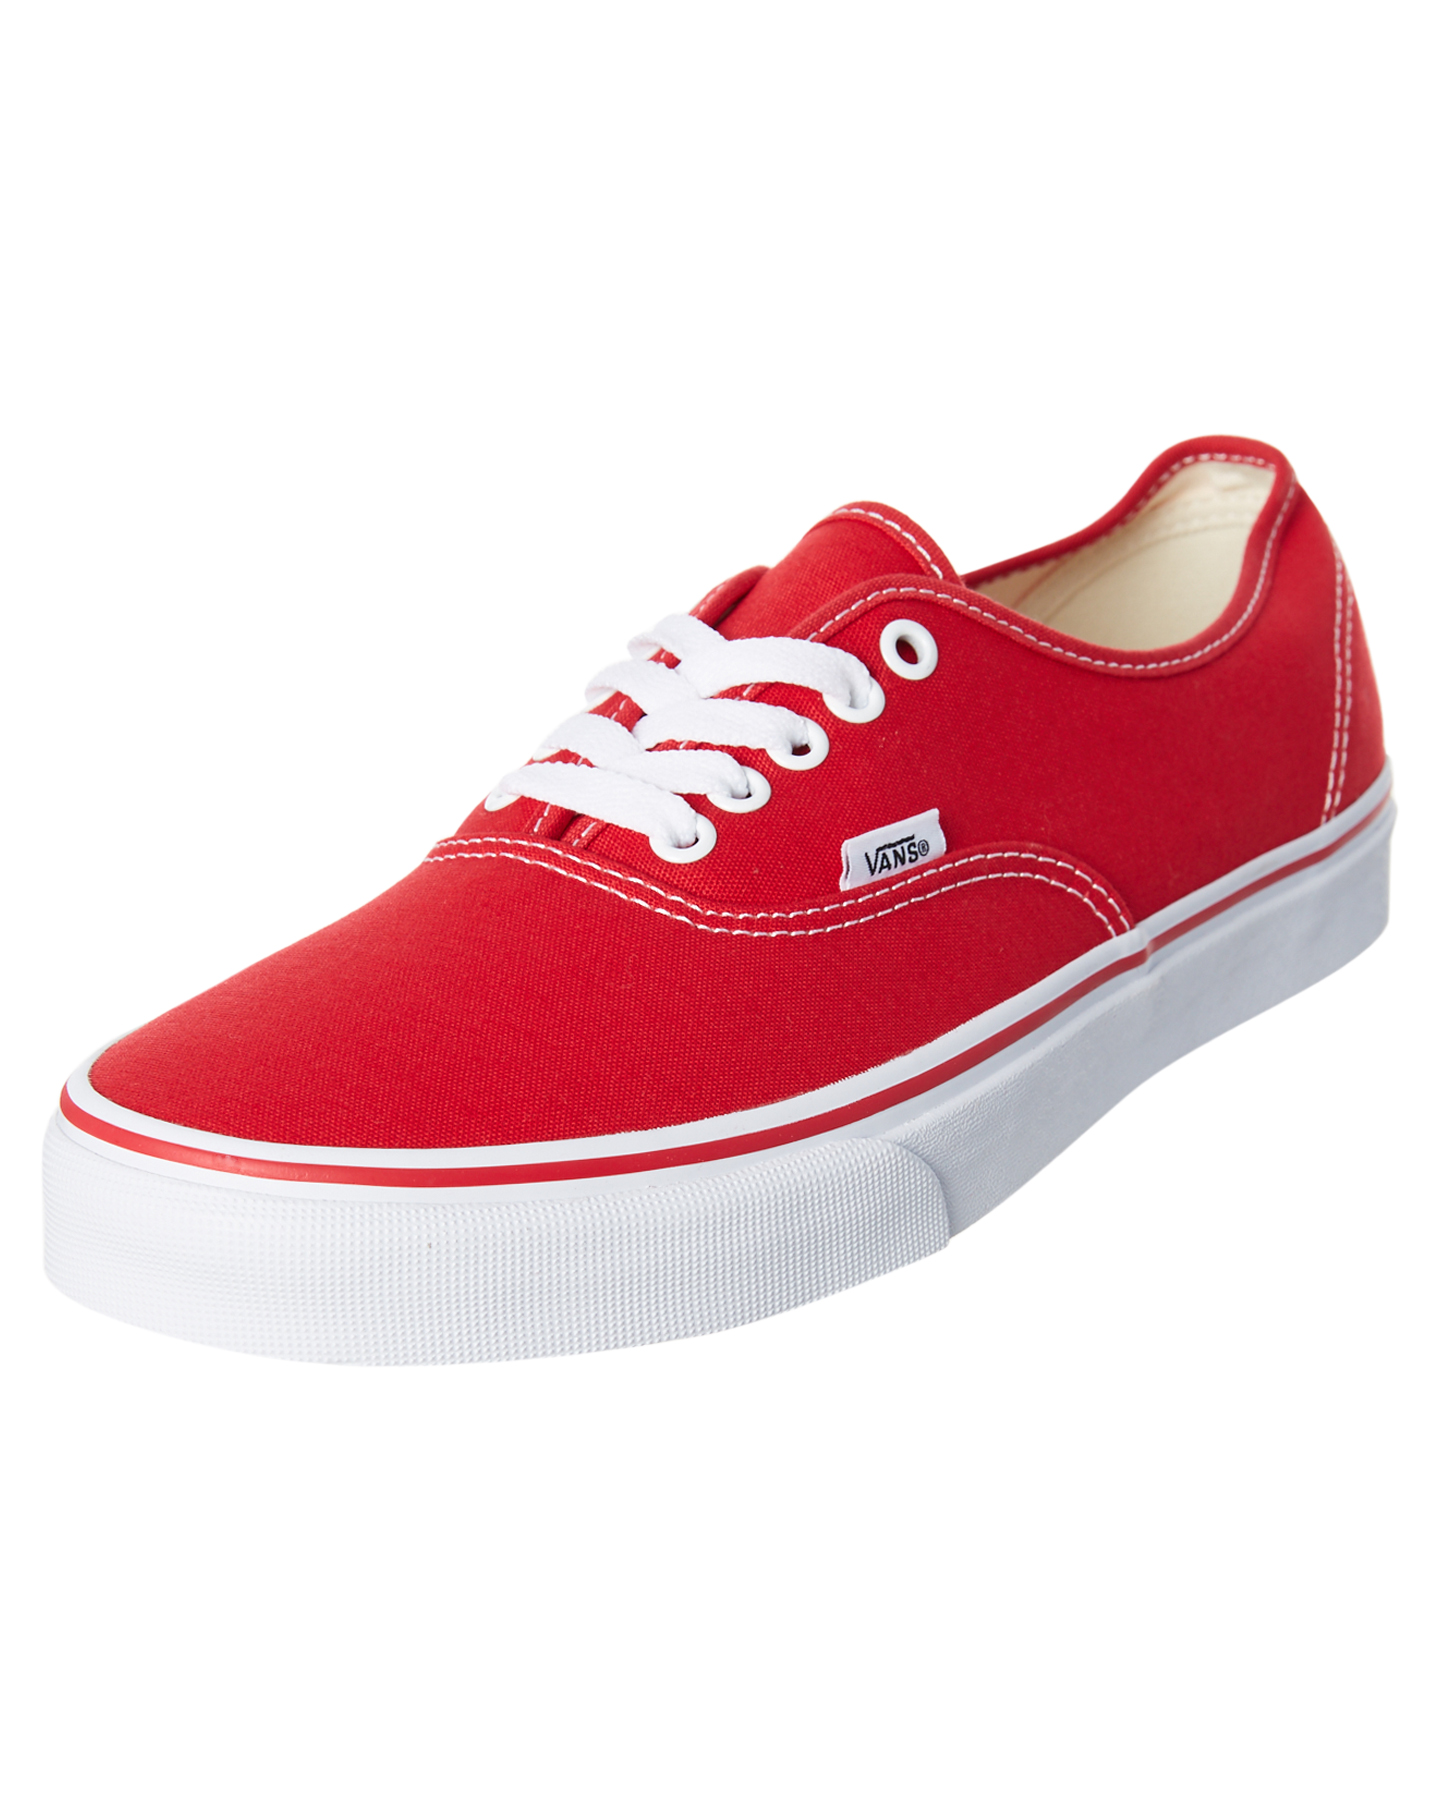 Vans Womens Authentic Shoe - Red | SurfStitch Red Vans Shoes For Girls